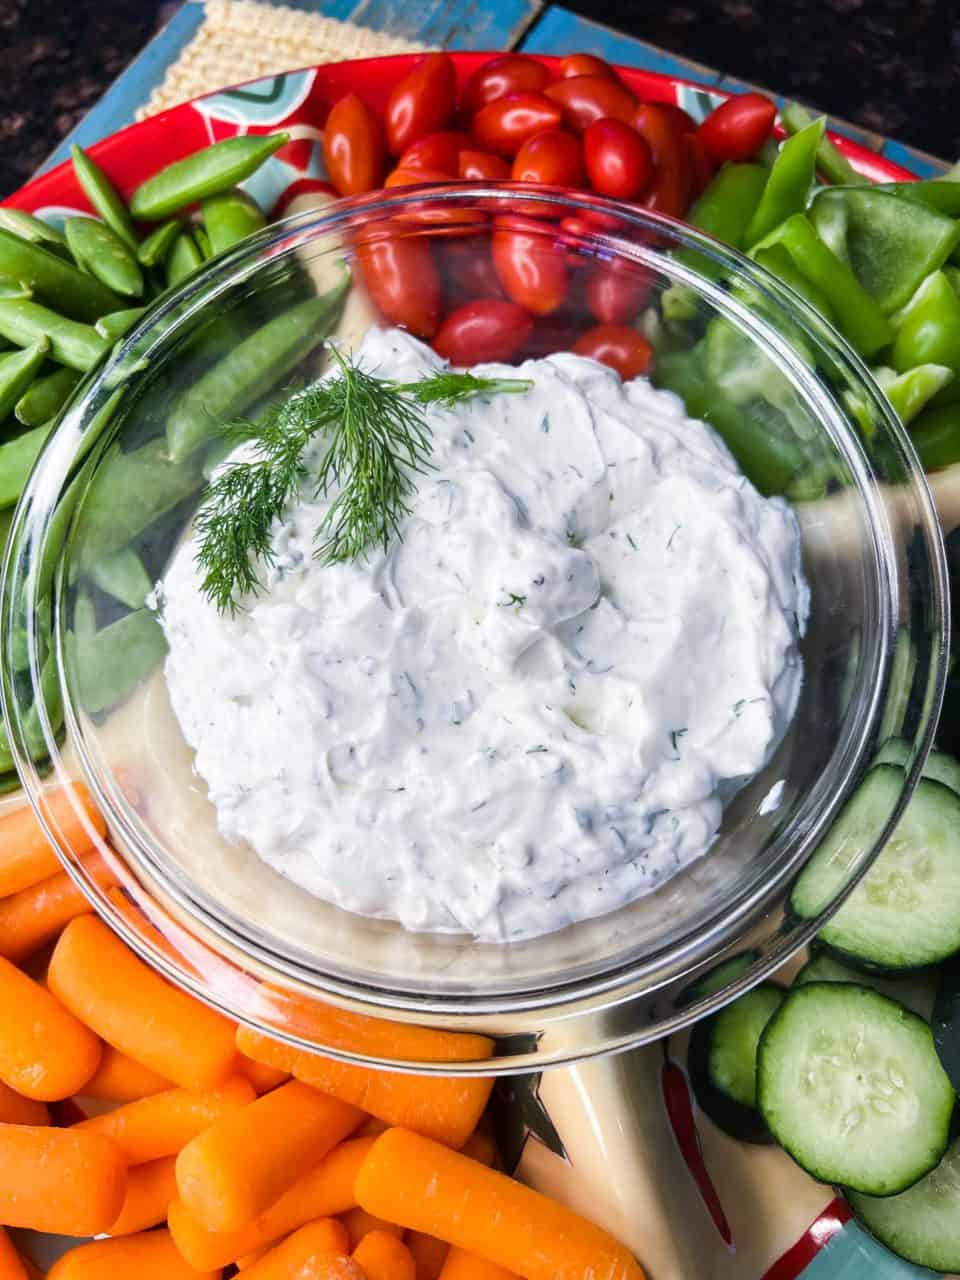 Finished Easy Homemade Ranch Dip surrounded by vegetables.